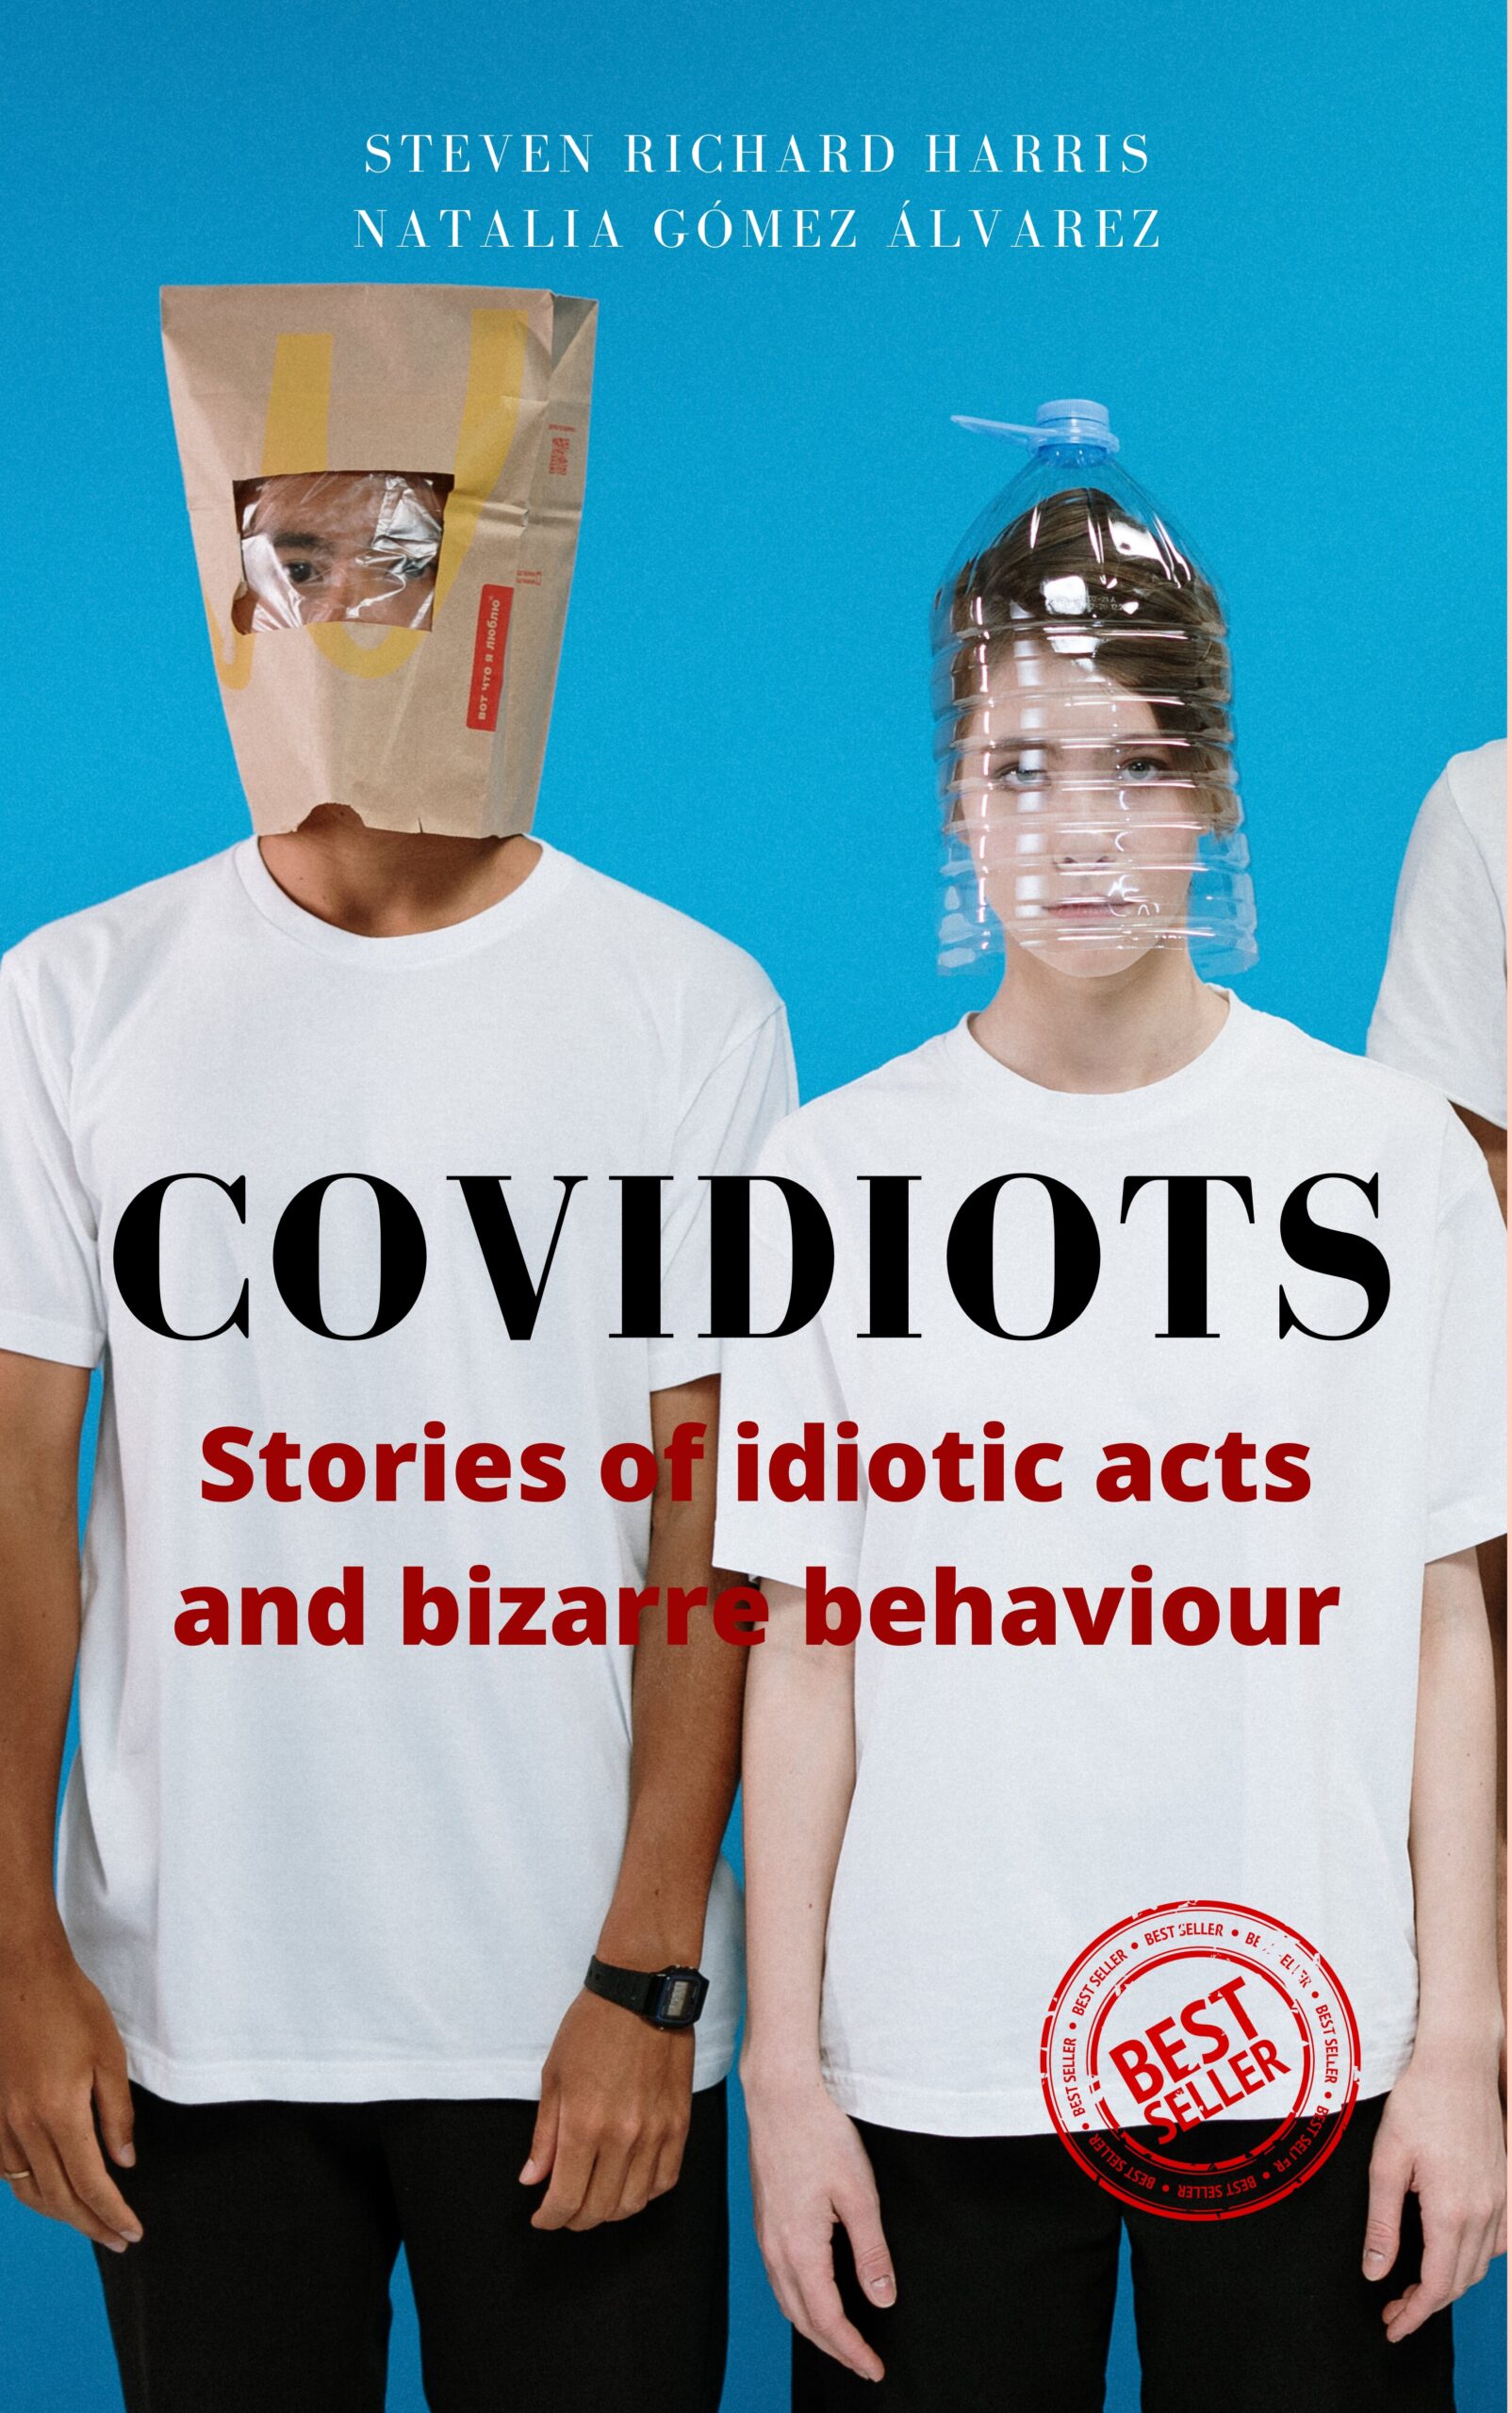 FREE: COVIDIOTS – Stories of idiotic acts and bizarre behaviour by Steven Richard Harris